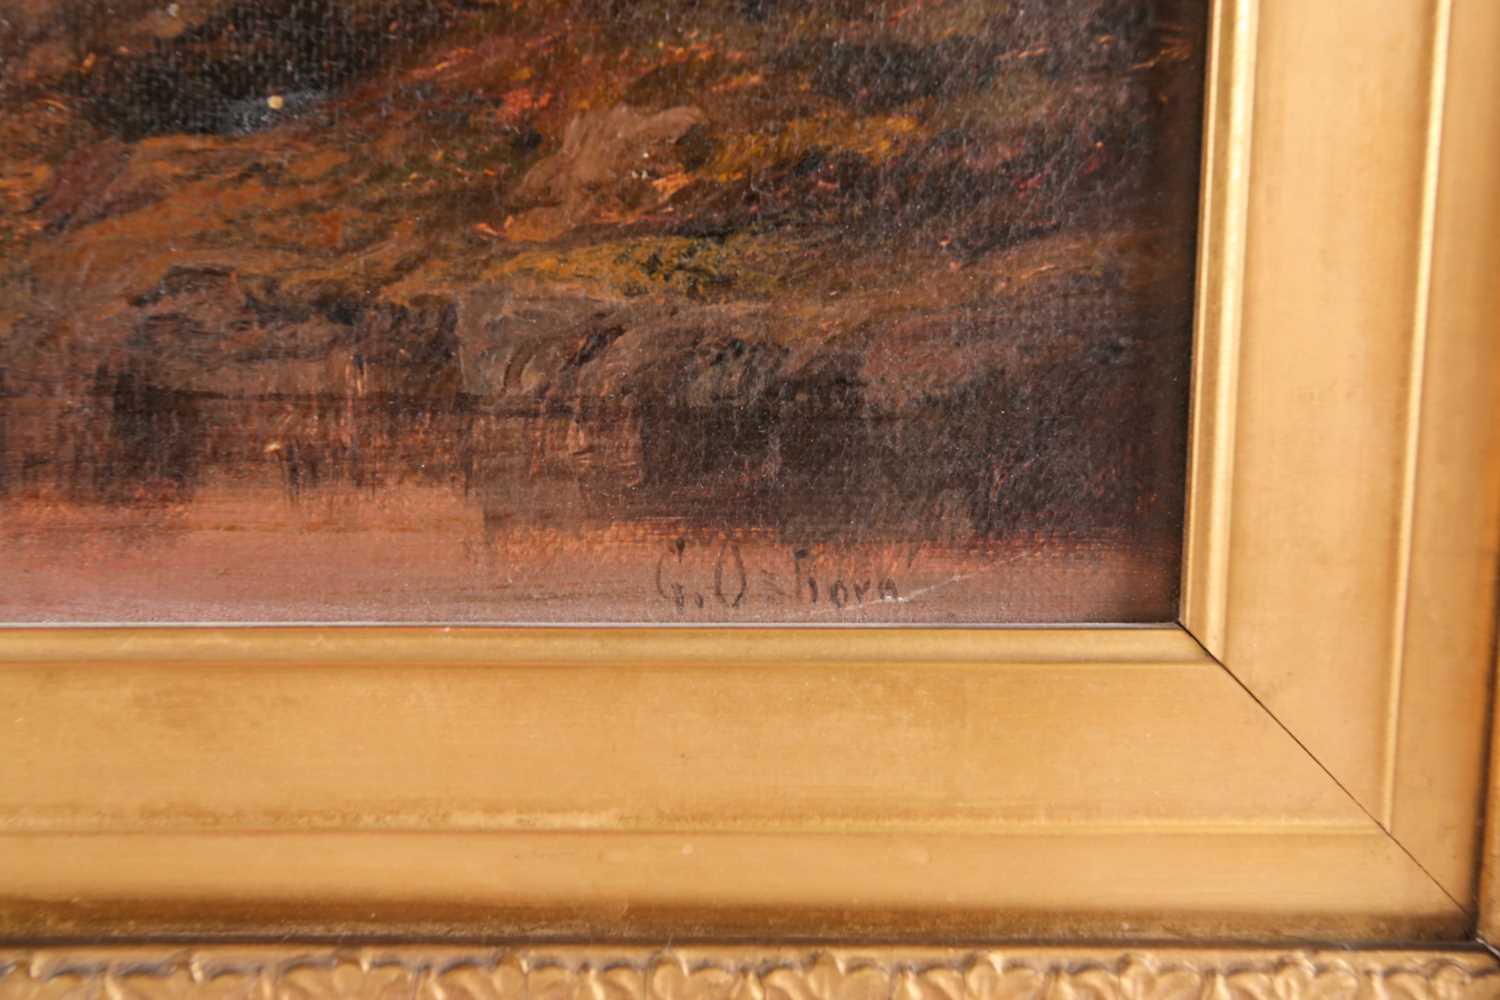 G Osborne (19th Century British School), Figures on the riverbank at sunset, oil on canvas, signed - Image 4 of 4